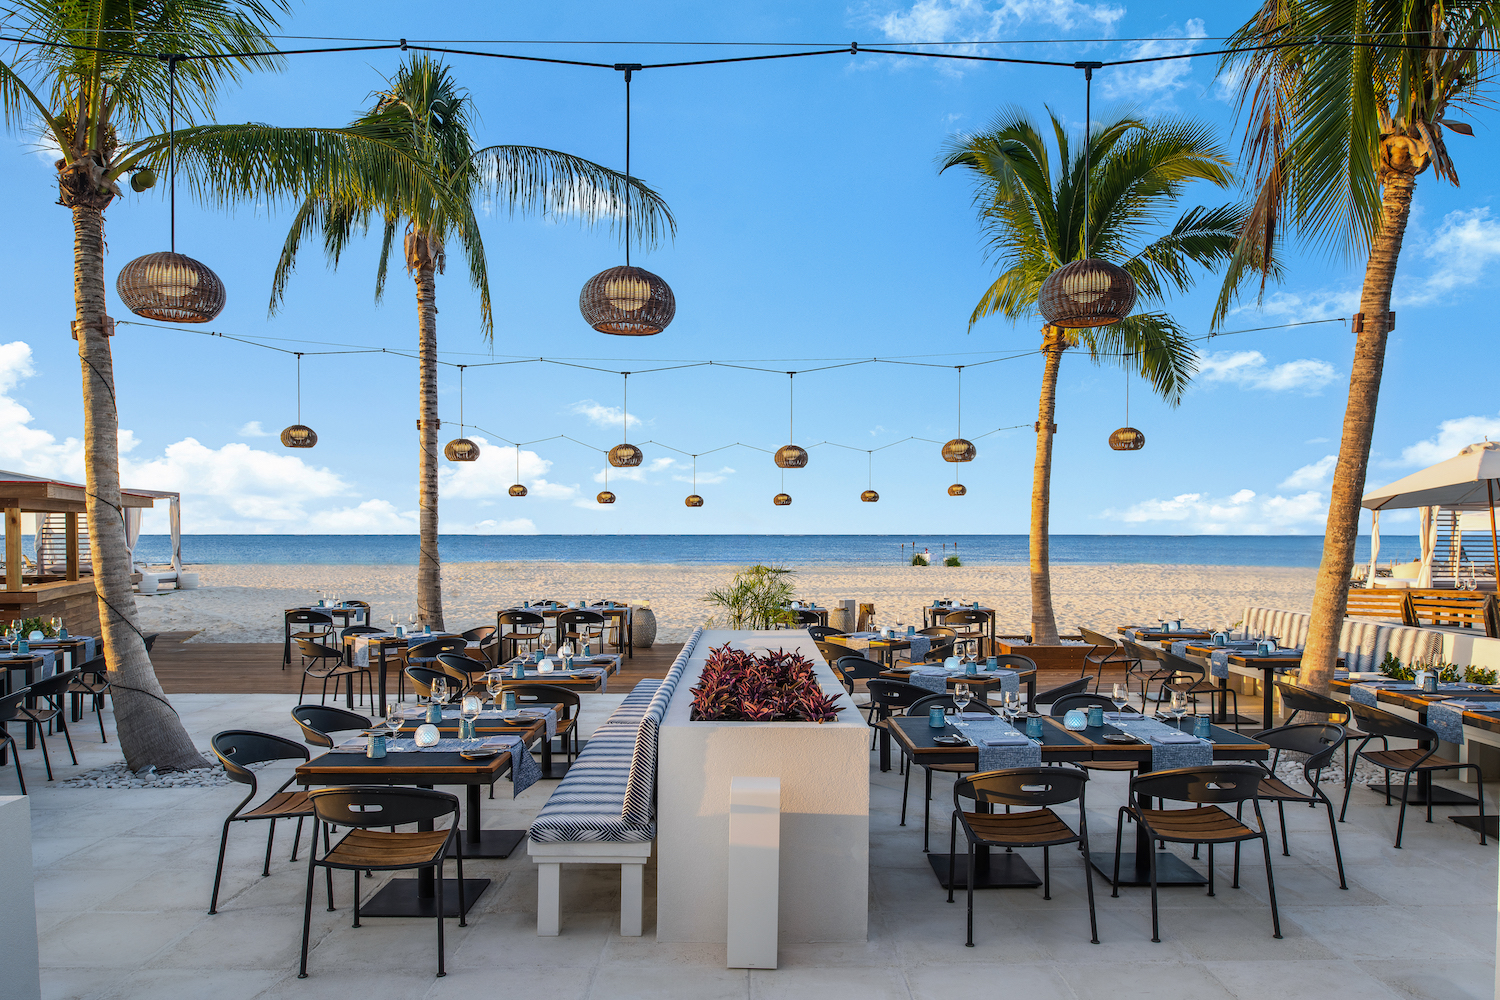 a beachside restaurant with palm trees and hanging lanterns